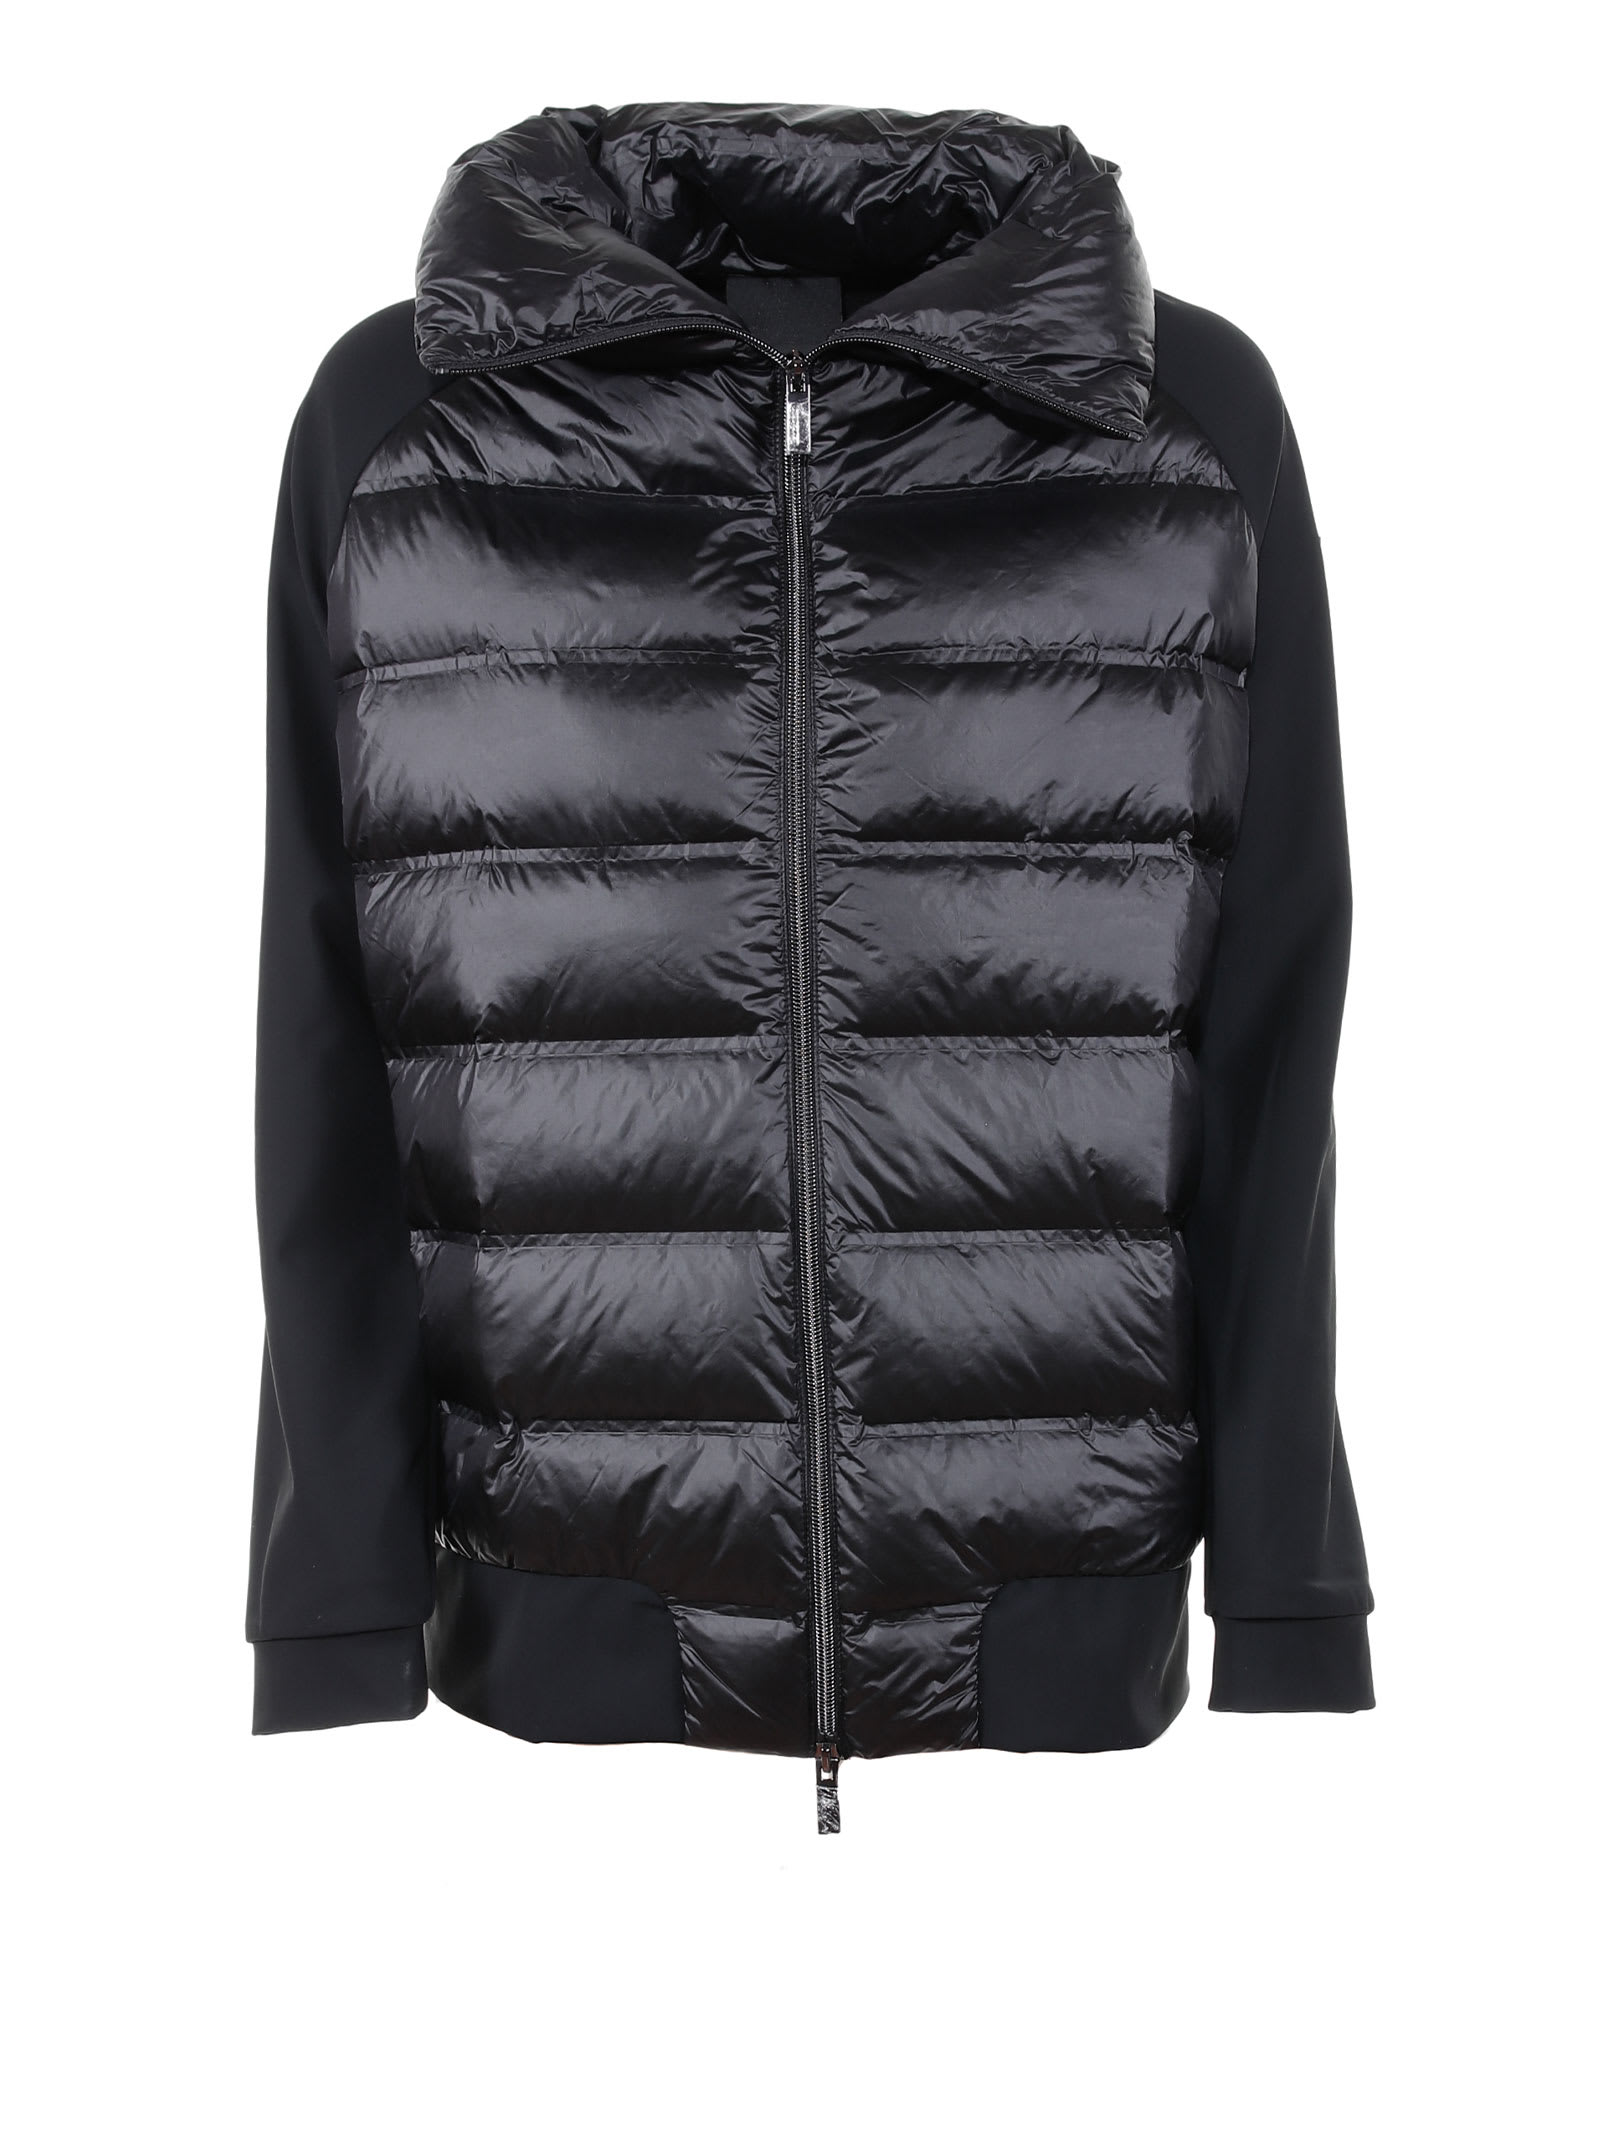 RRD - Roberto Ricci Design quilted jacket